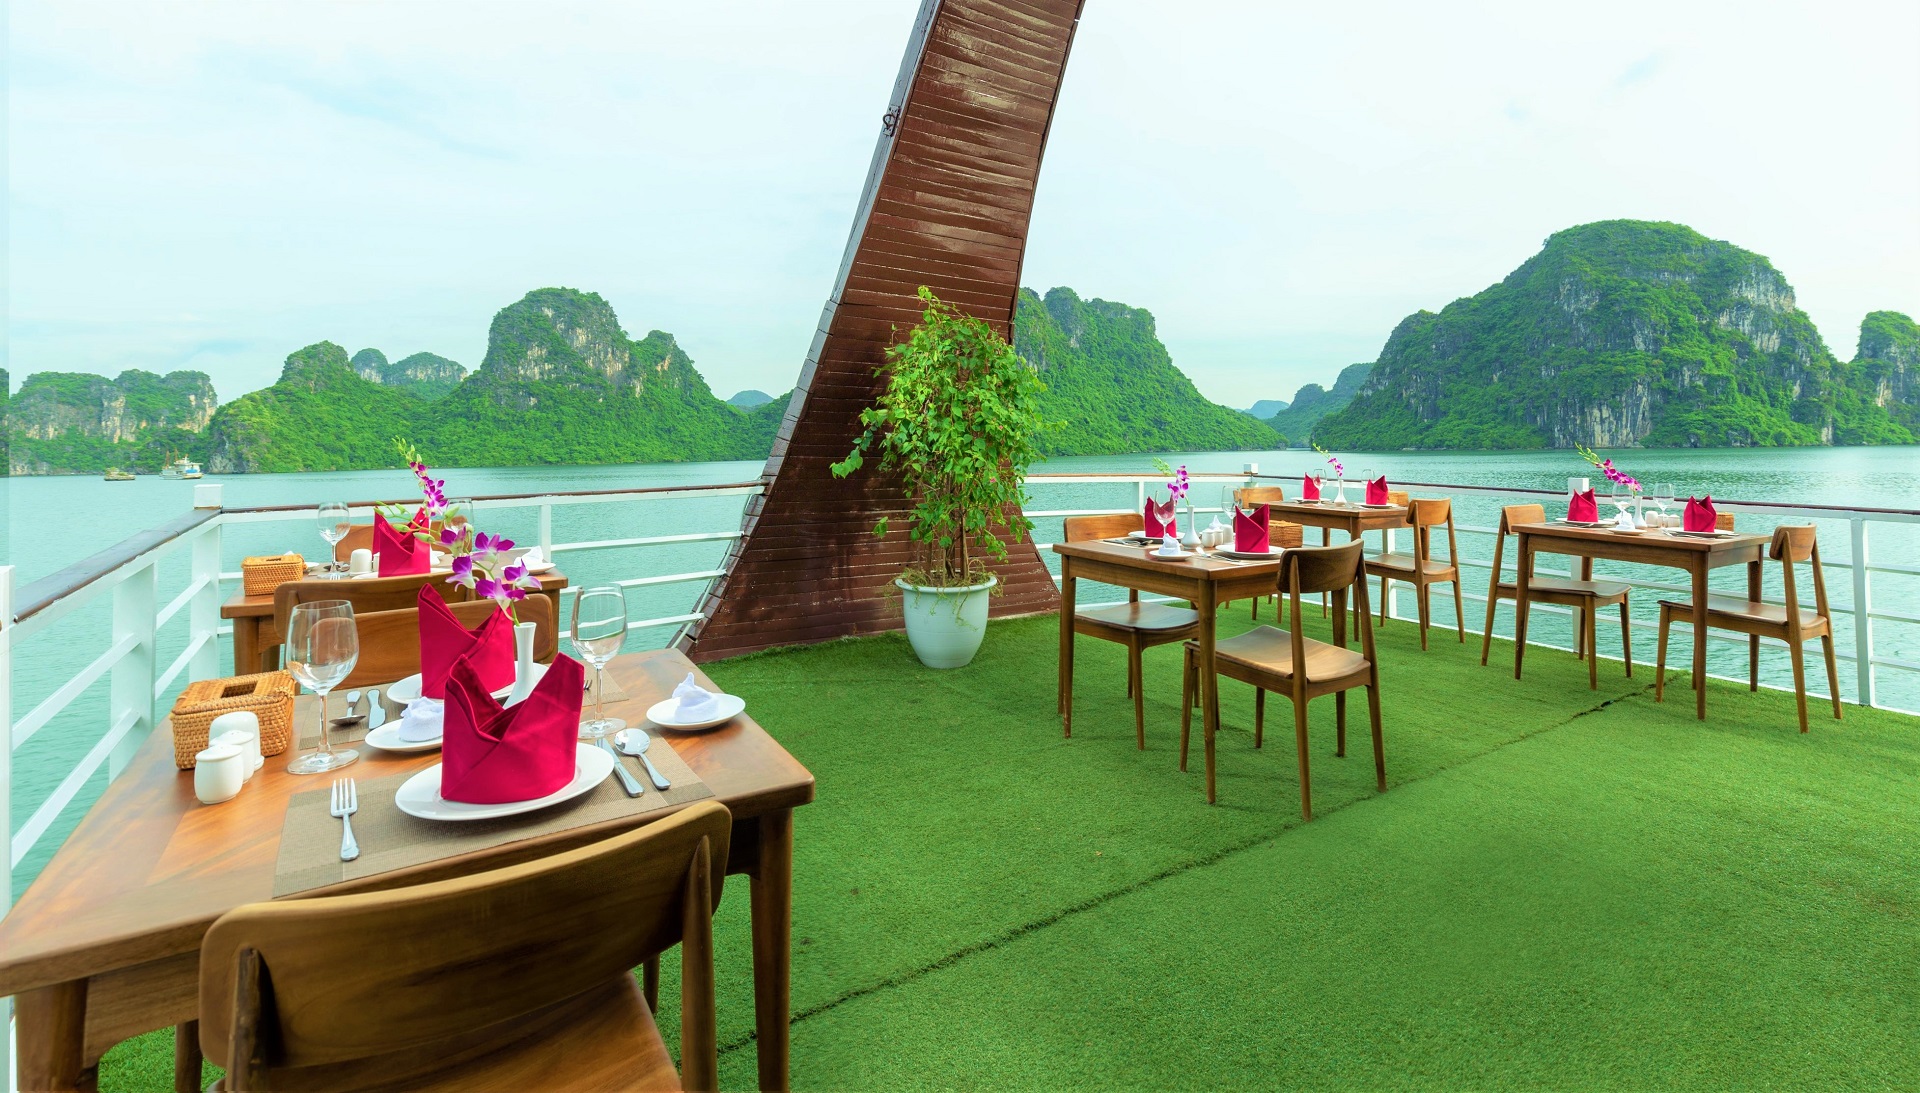 Luxury cruise to explore Halong Bay with 8 hours